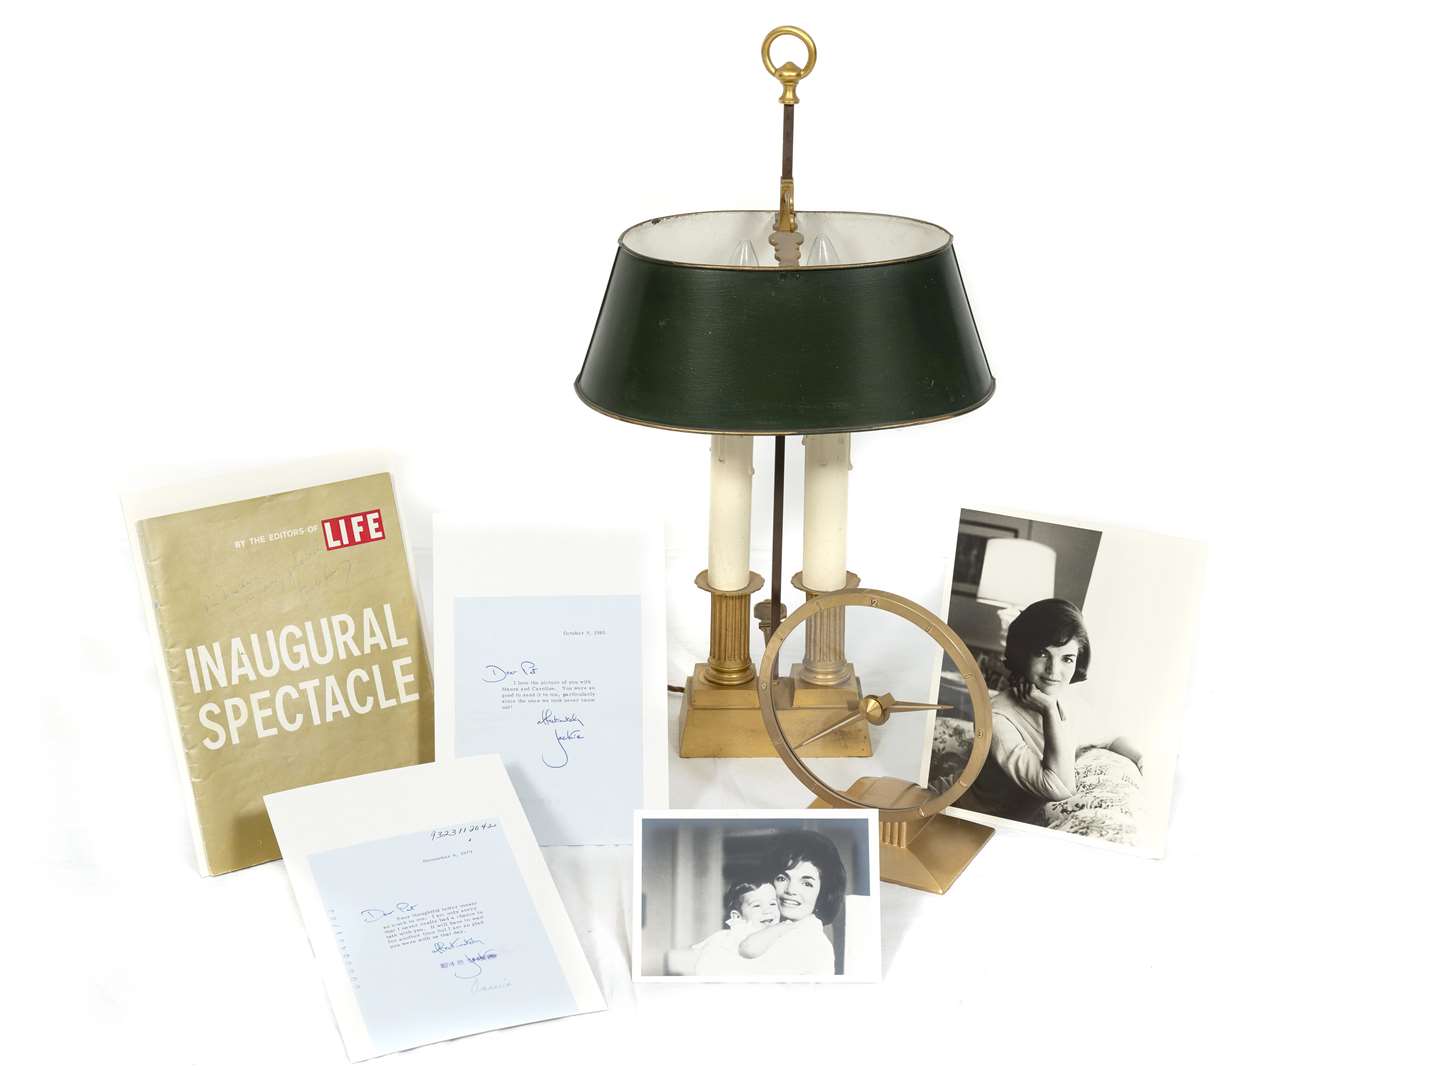 The collection includes a Louis XVI-style bronze twin-light bouillotte lamp, which was in the White House during the presidential term of John F Kennedy, and letters from Jackie Kennedy (Robert Malone/PA)